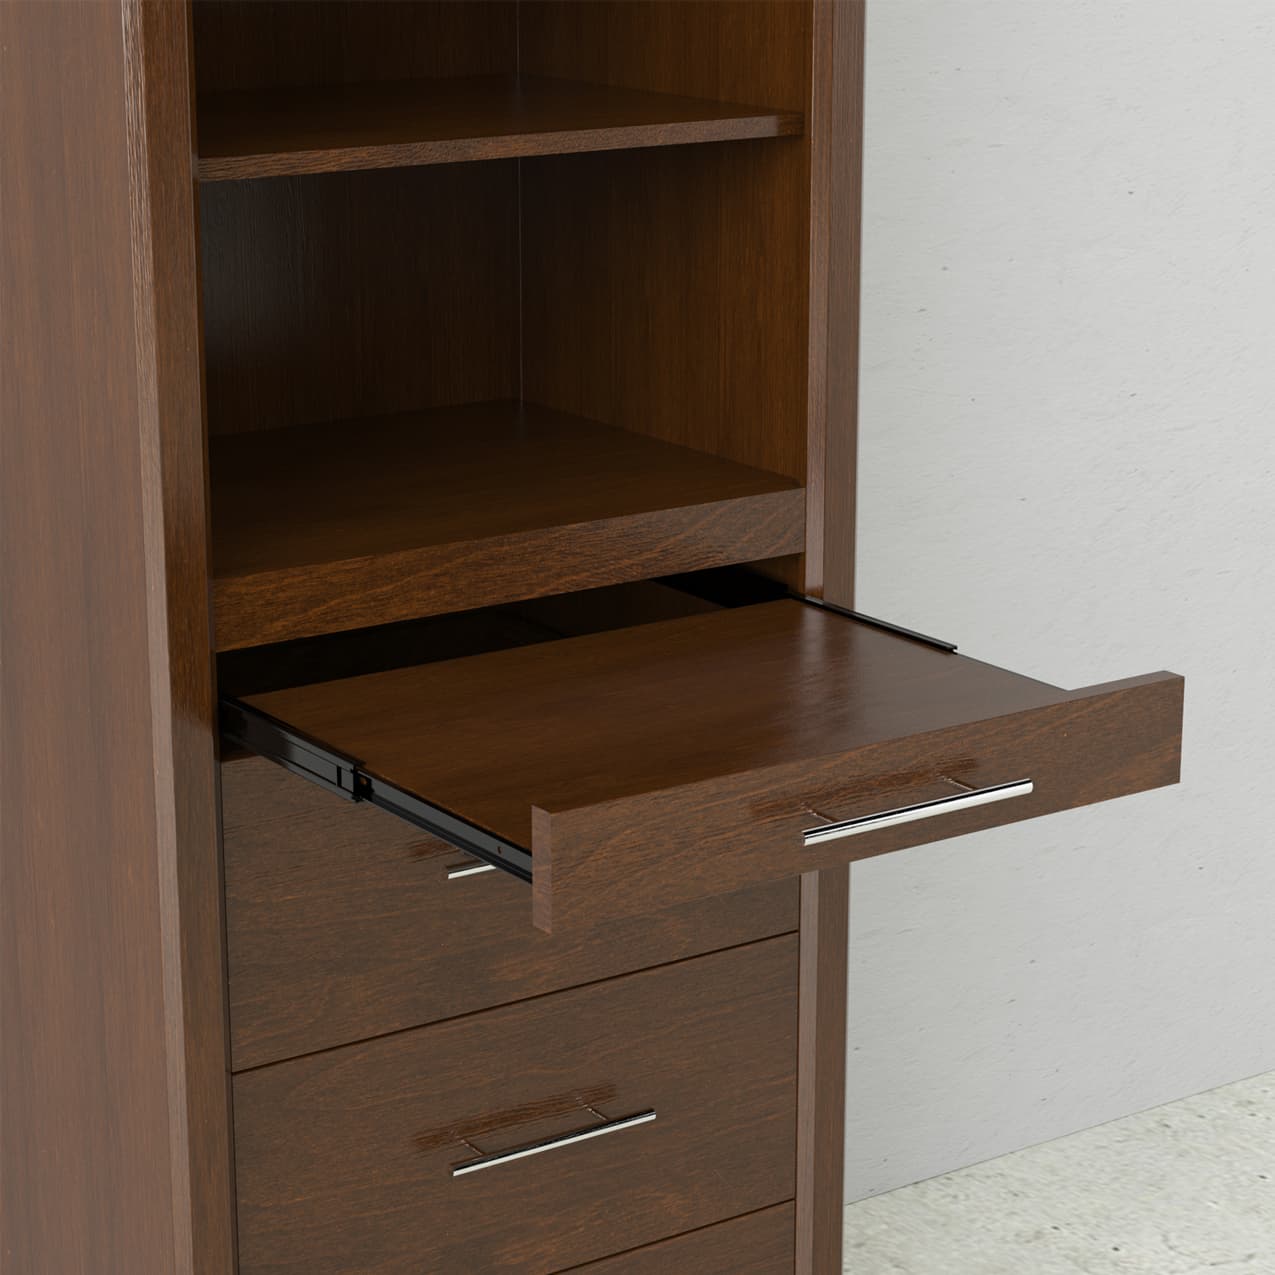 coventry storage cabinet with drawers pullout nightstand and adjustable shelves or haning bar for clothes customizable storage